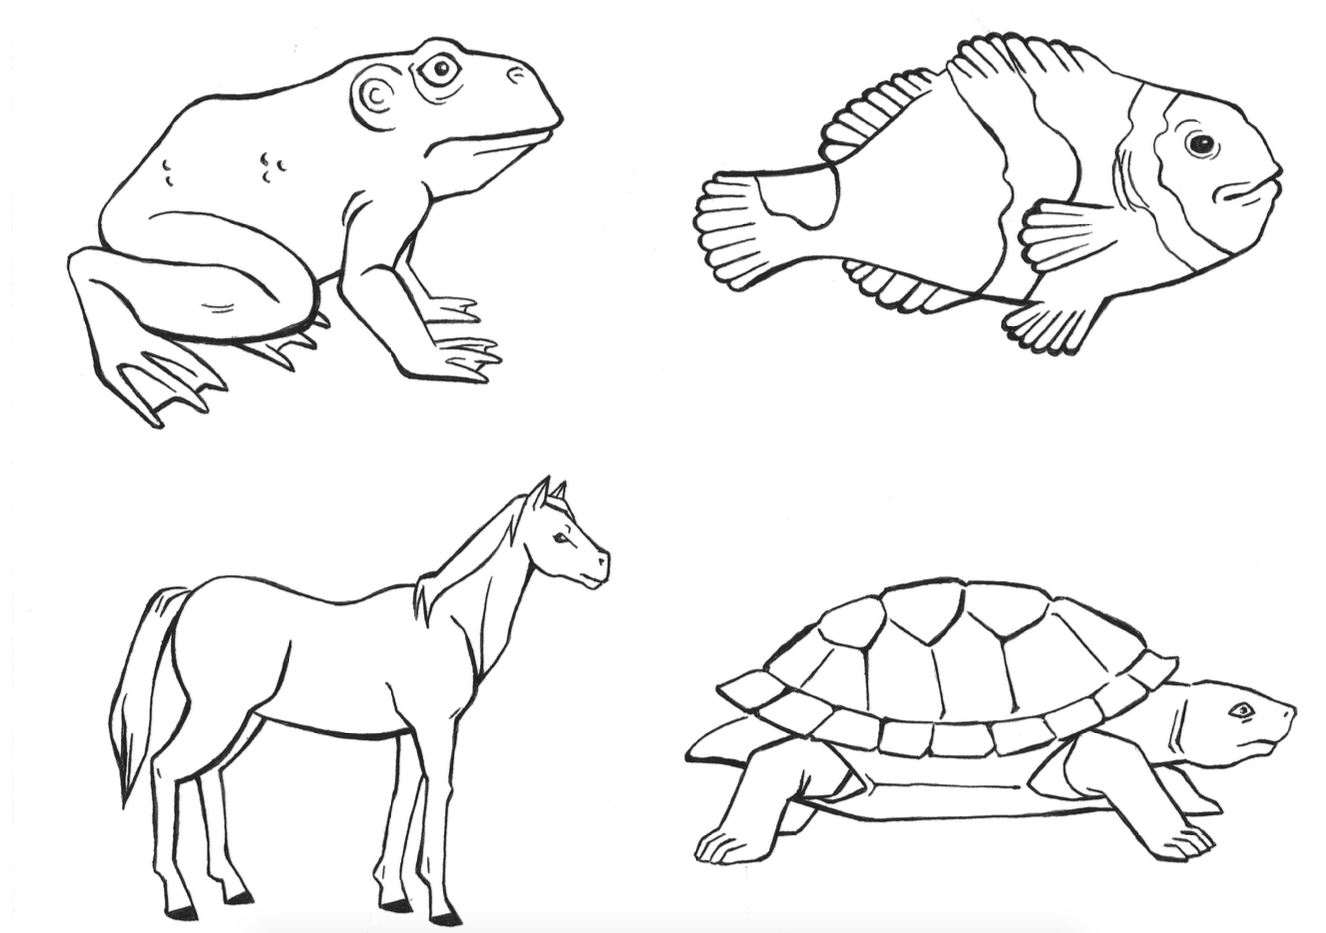 Zoology-Parts Of Vertebrates - Collection Of 5 Sets Parts Of All Chordates 3-Part Cards With Definitions And Objects